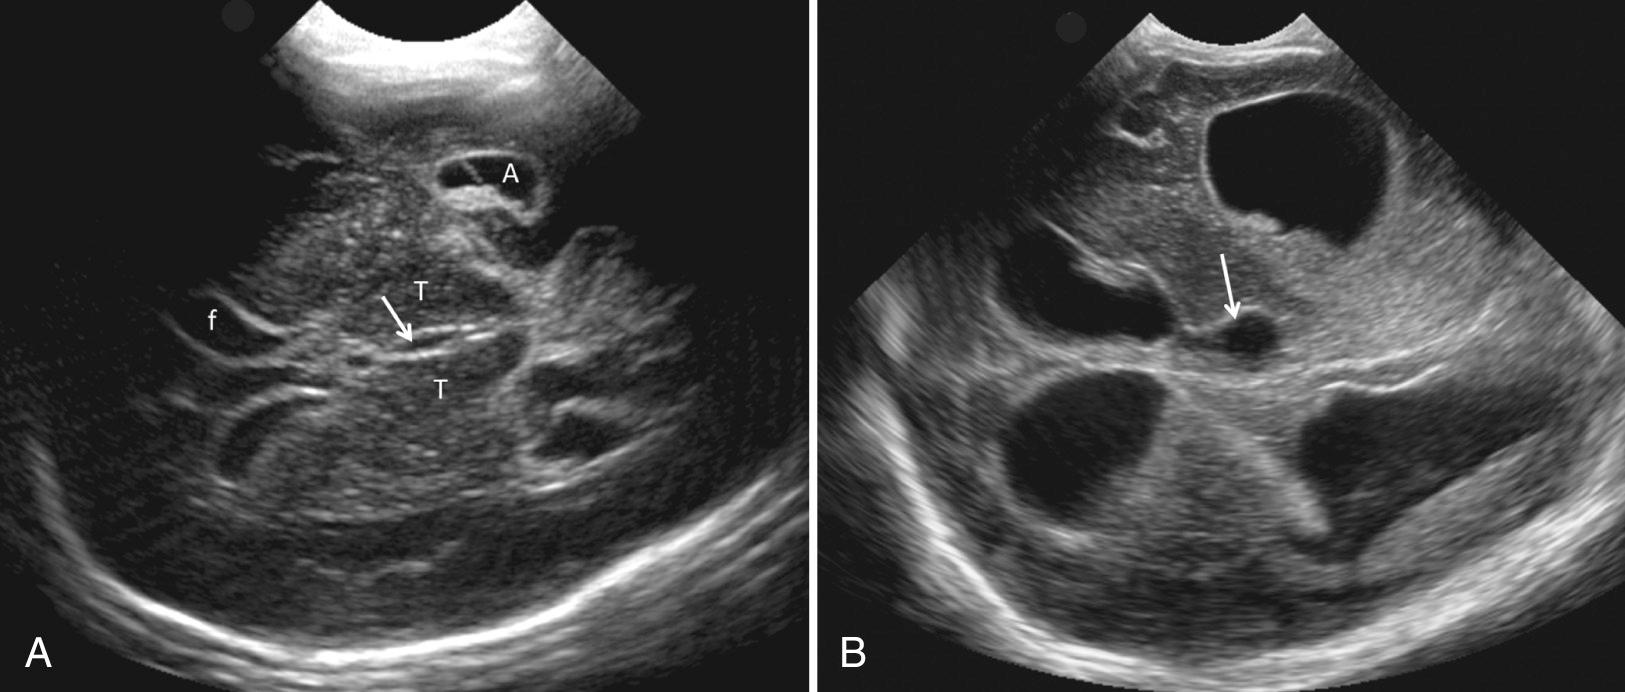 FIG. 45.10, Mastoid Fontanelle Images of the Midbrain Level Above Fourth Ventricle in Neonates With Posthemorrhagic Hydrocephalus.